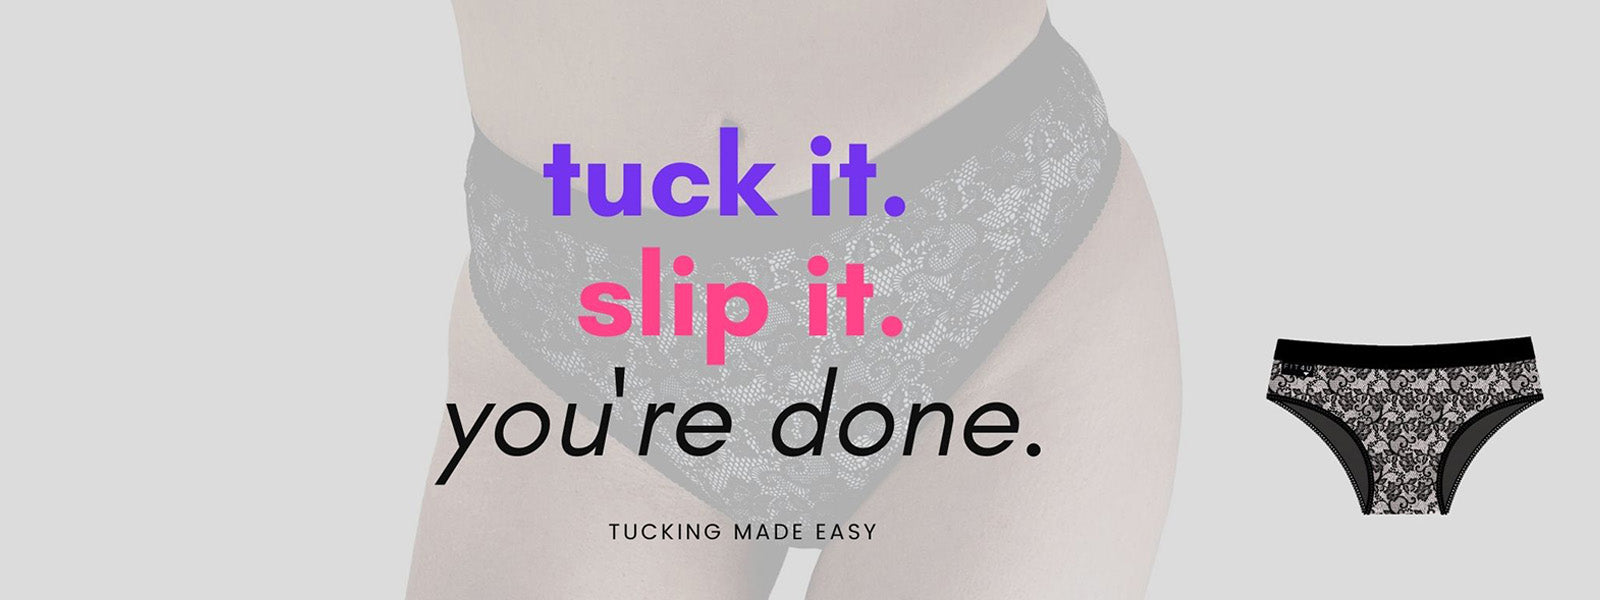 Tucking, made easy. Tuck it picture